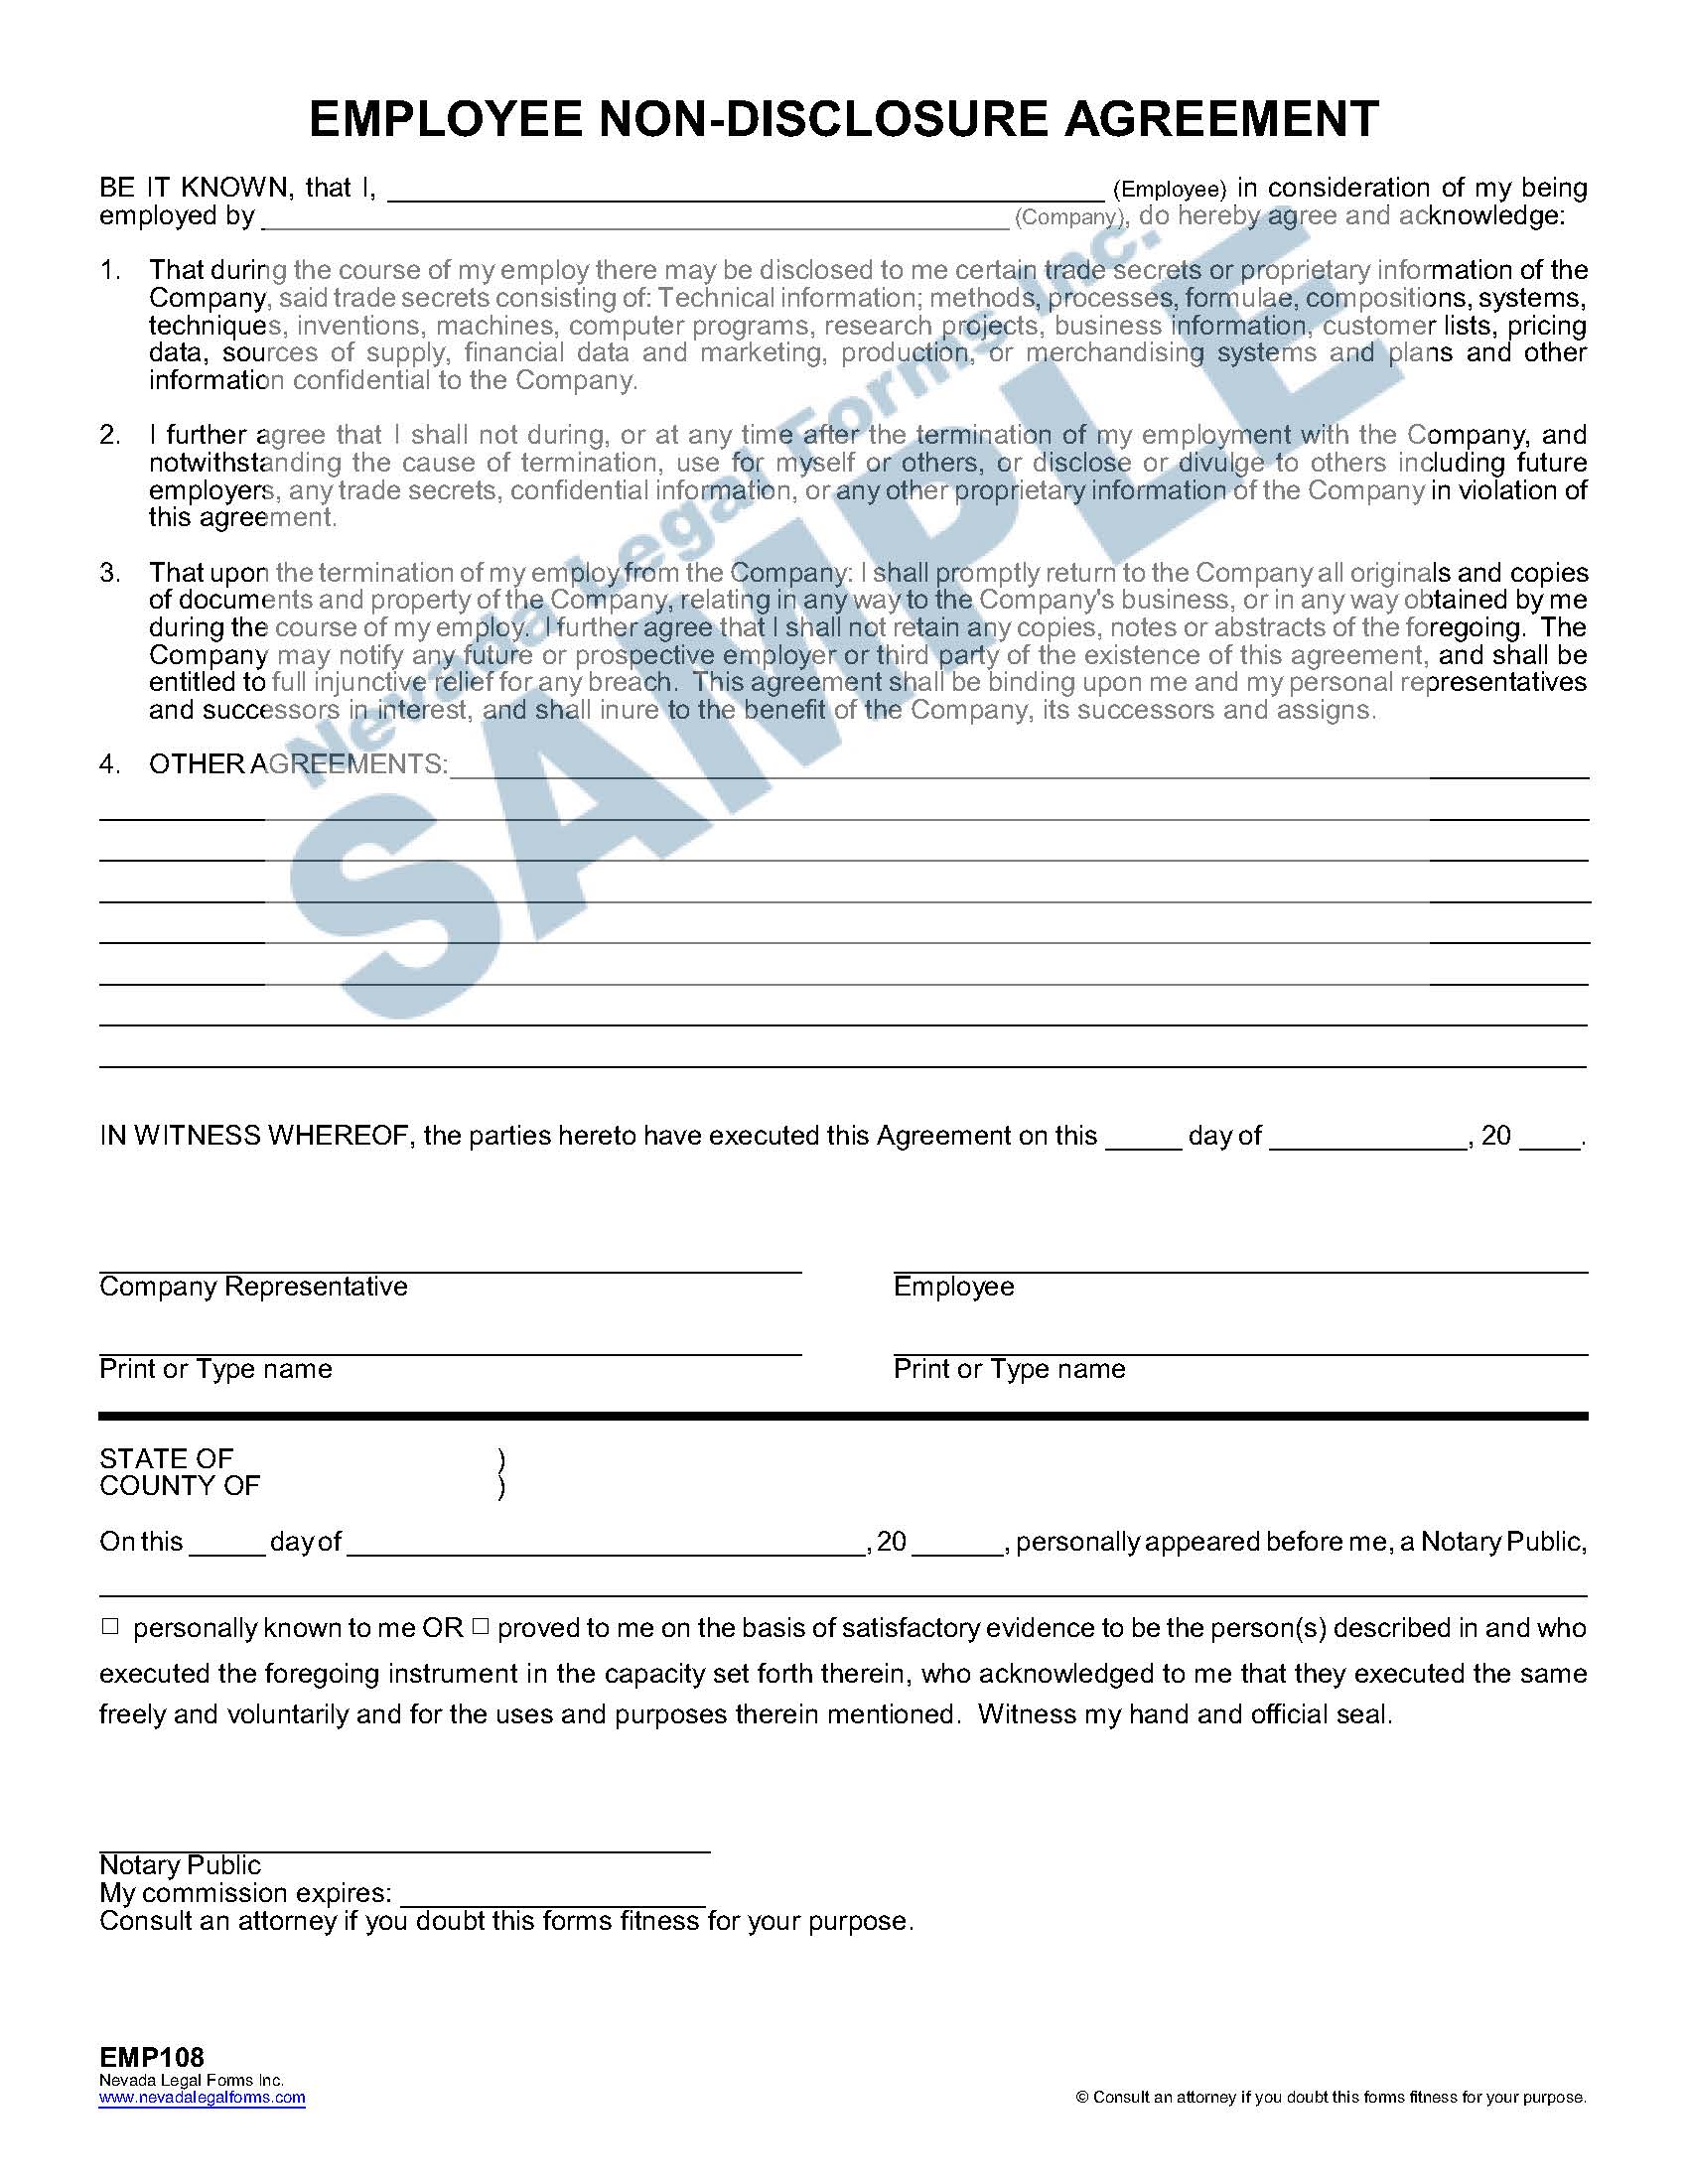 Employee Non Disclosure Agreement Nevada Legal Forms Services